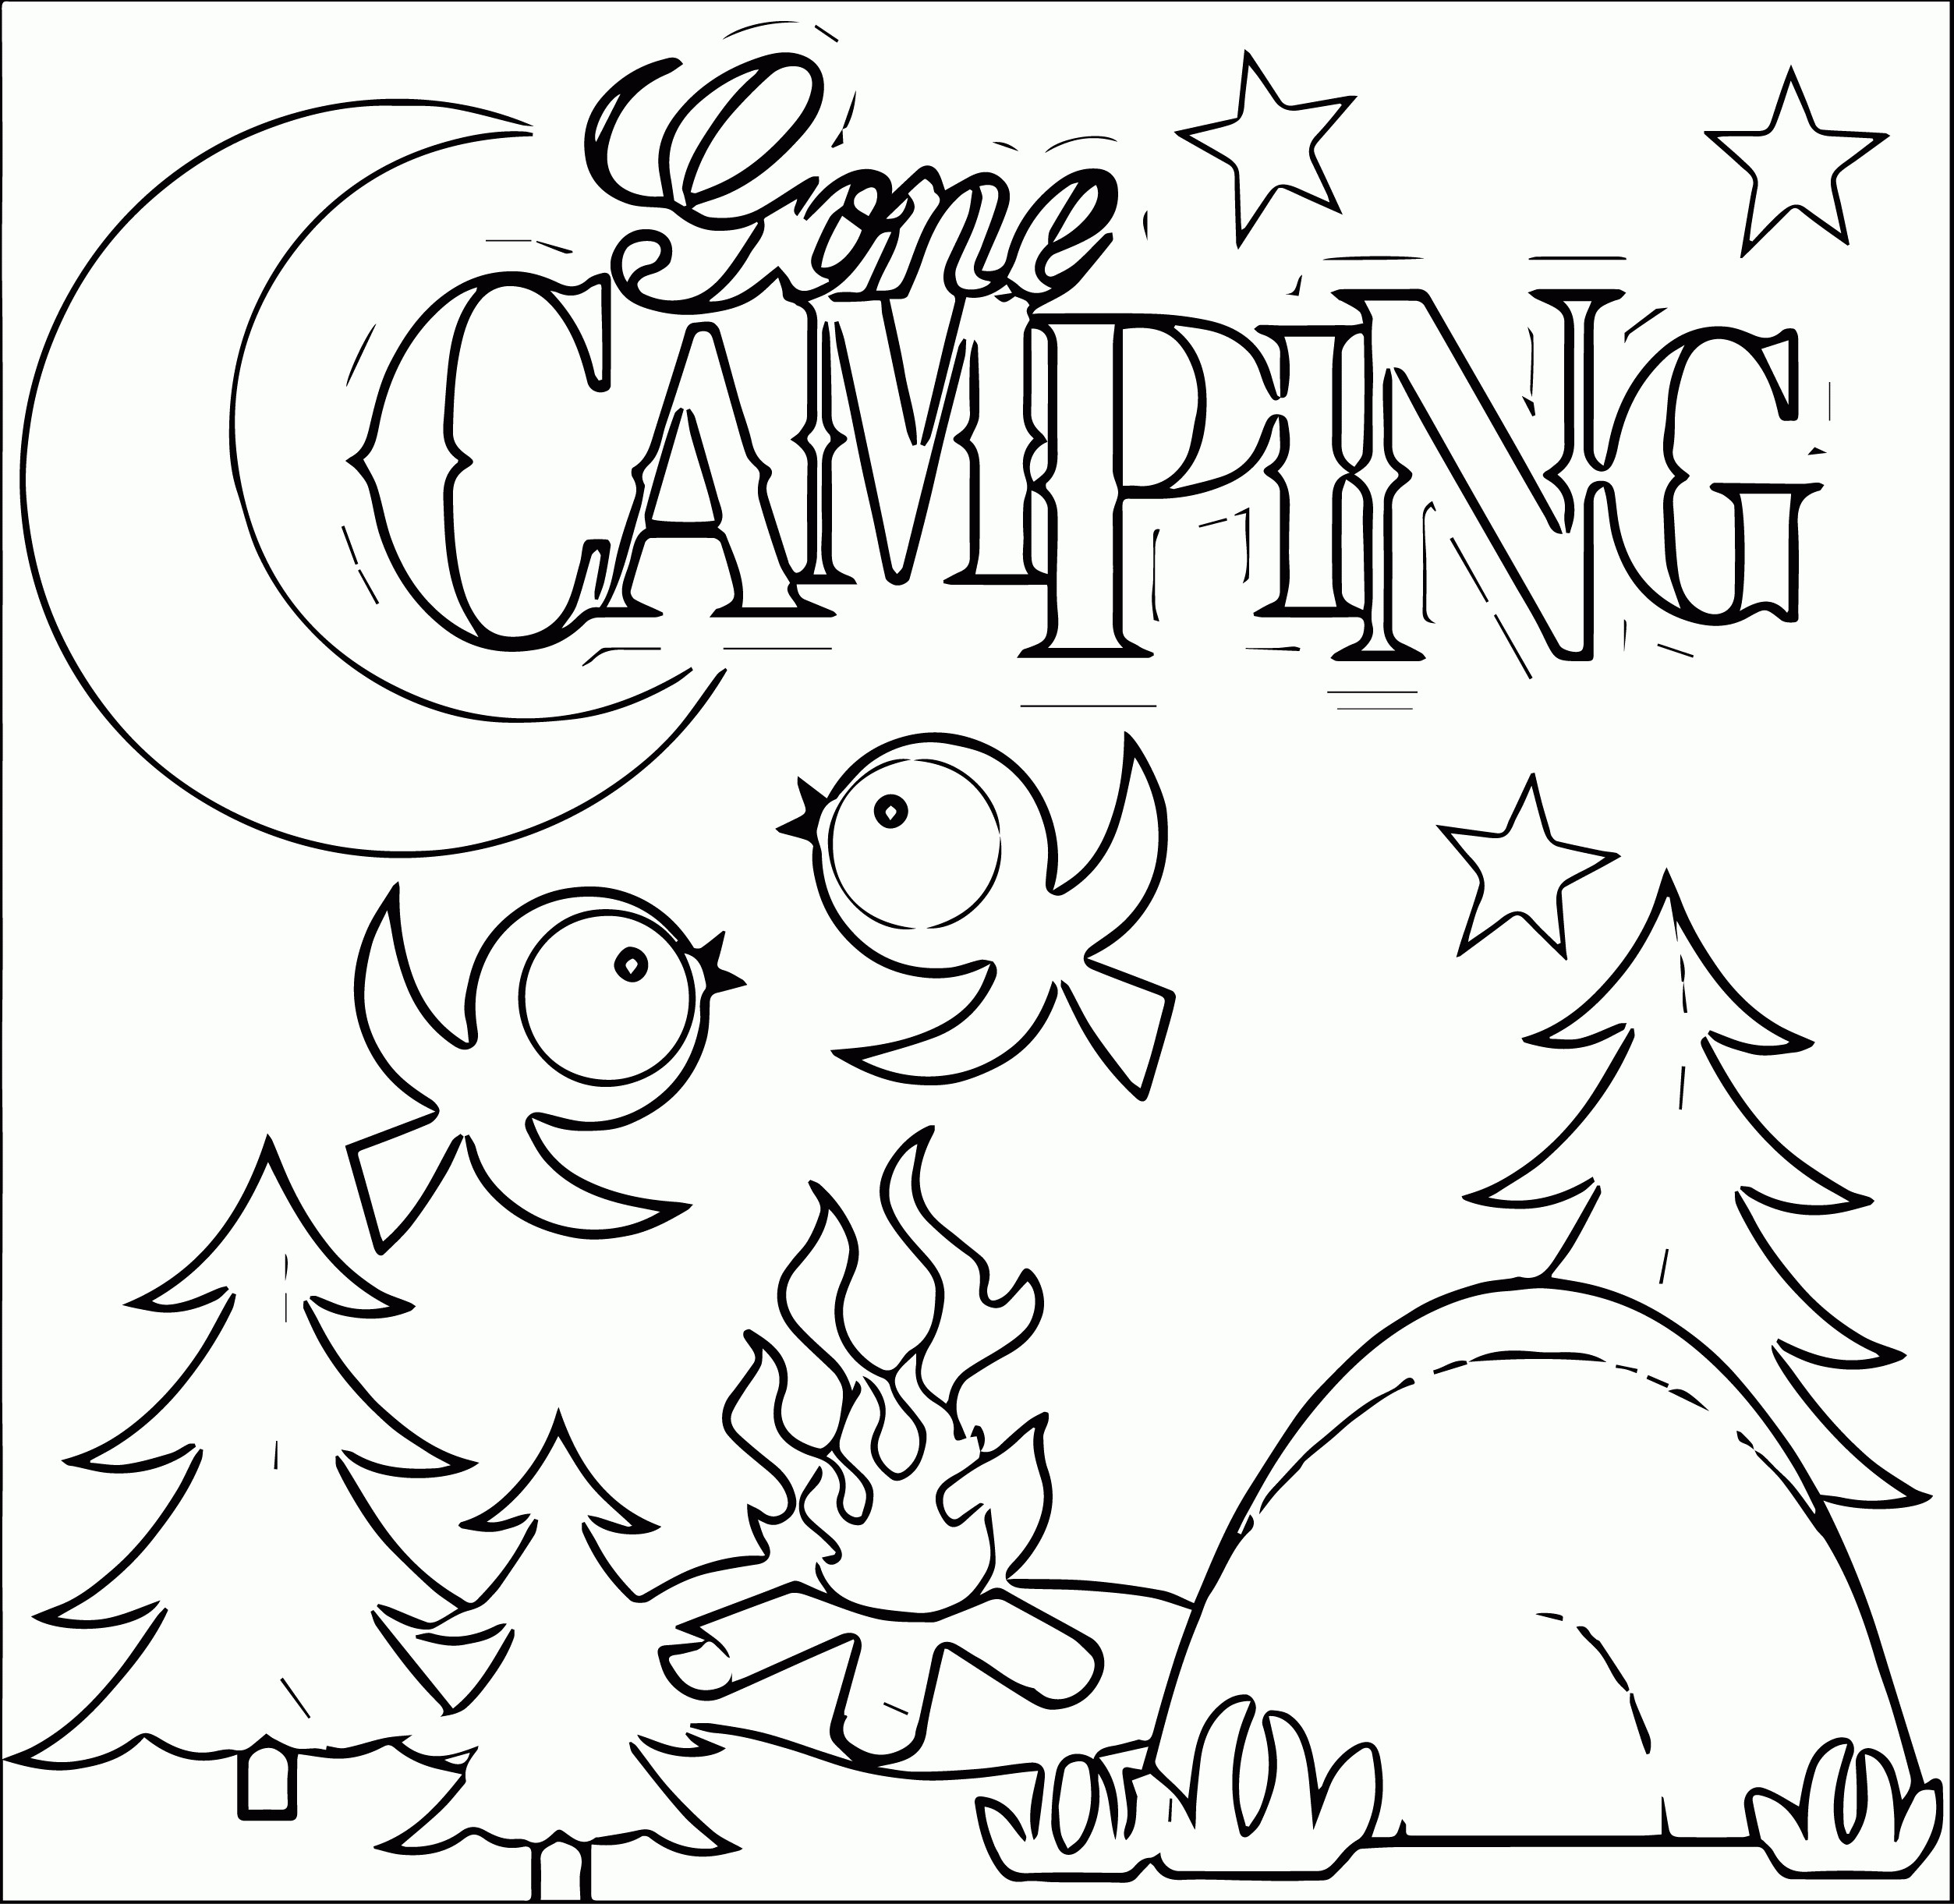 Camping Coloring Pages Printable
 Camping Coloring Pages Best Coloring Pages For Kids